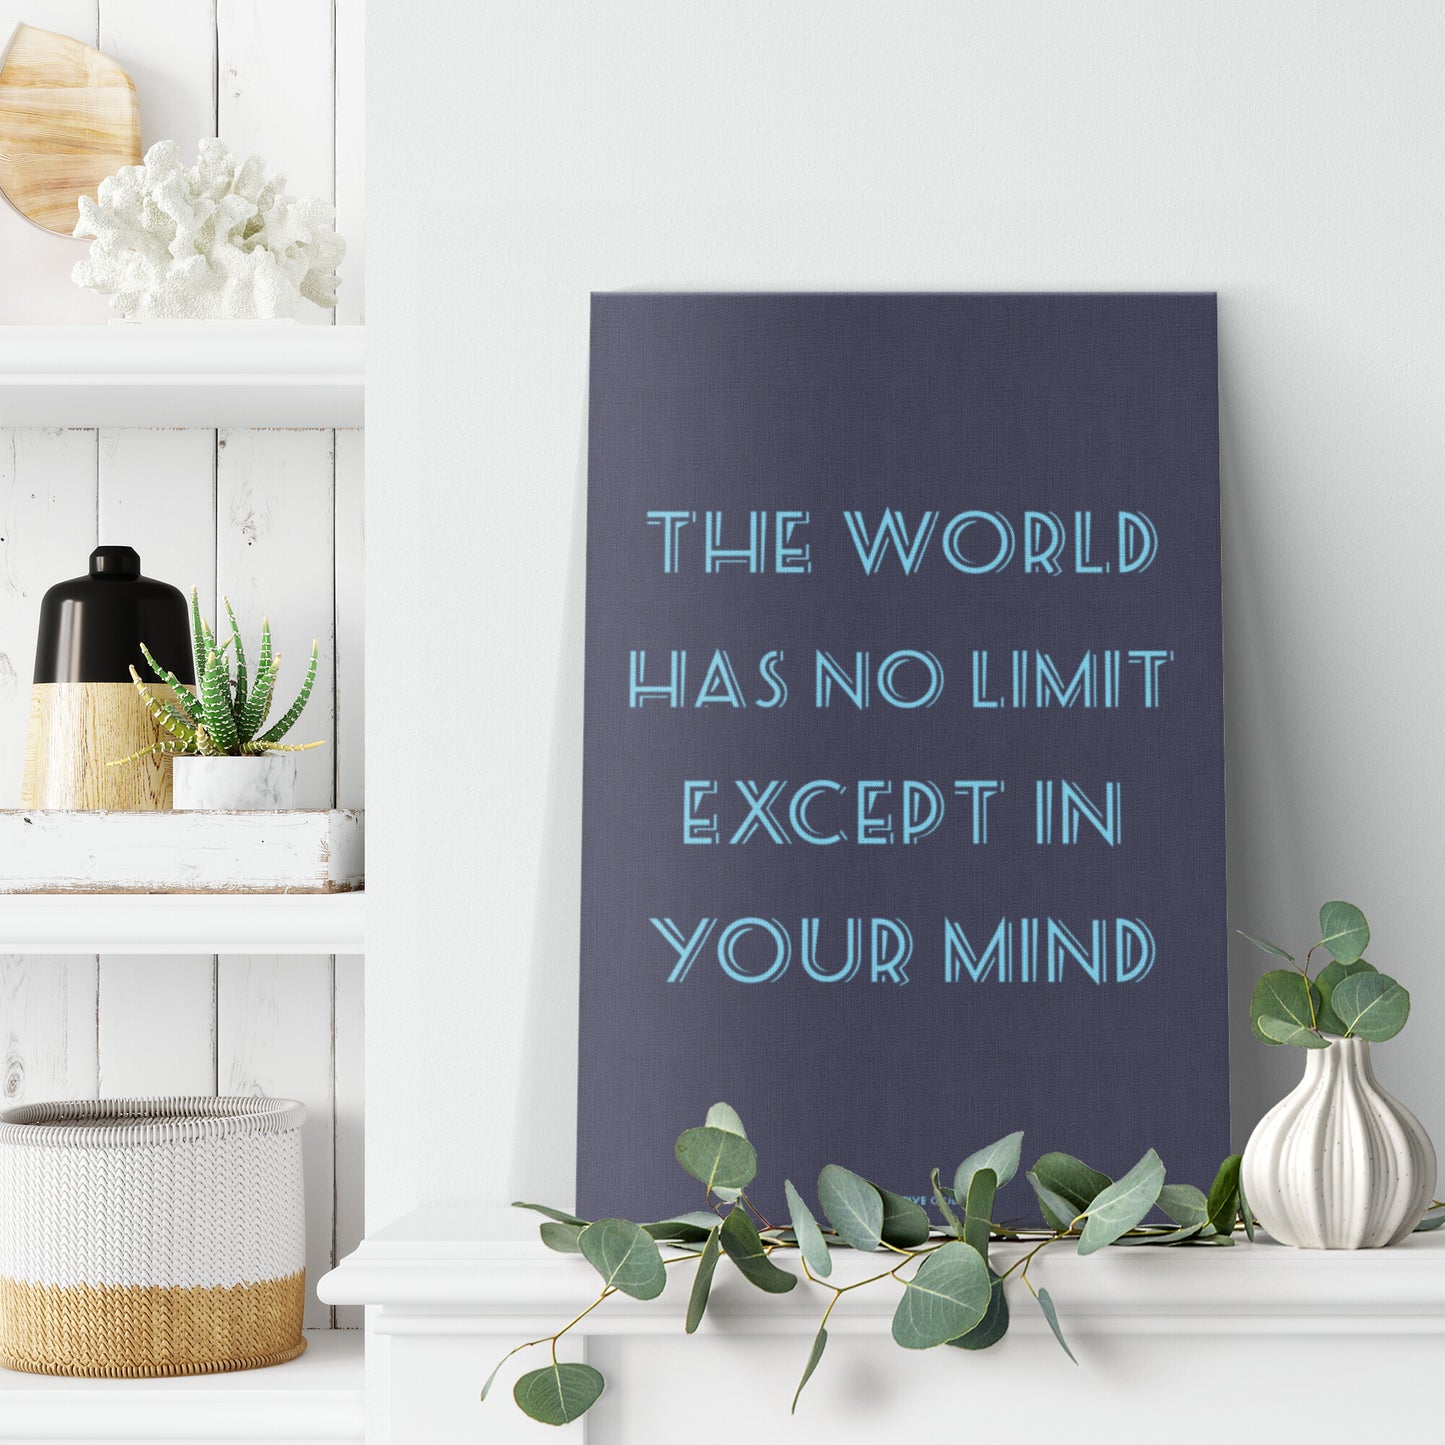 THE WORLD HAS NO LIMIT EXCEPT IN YOUR MIND